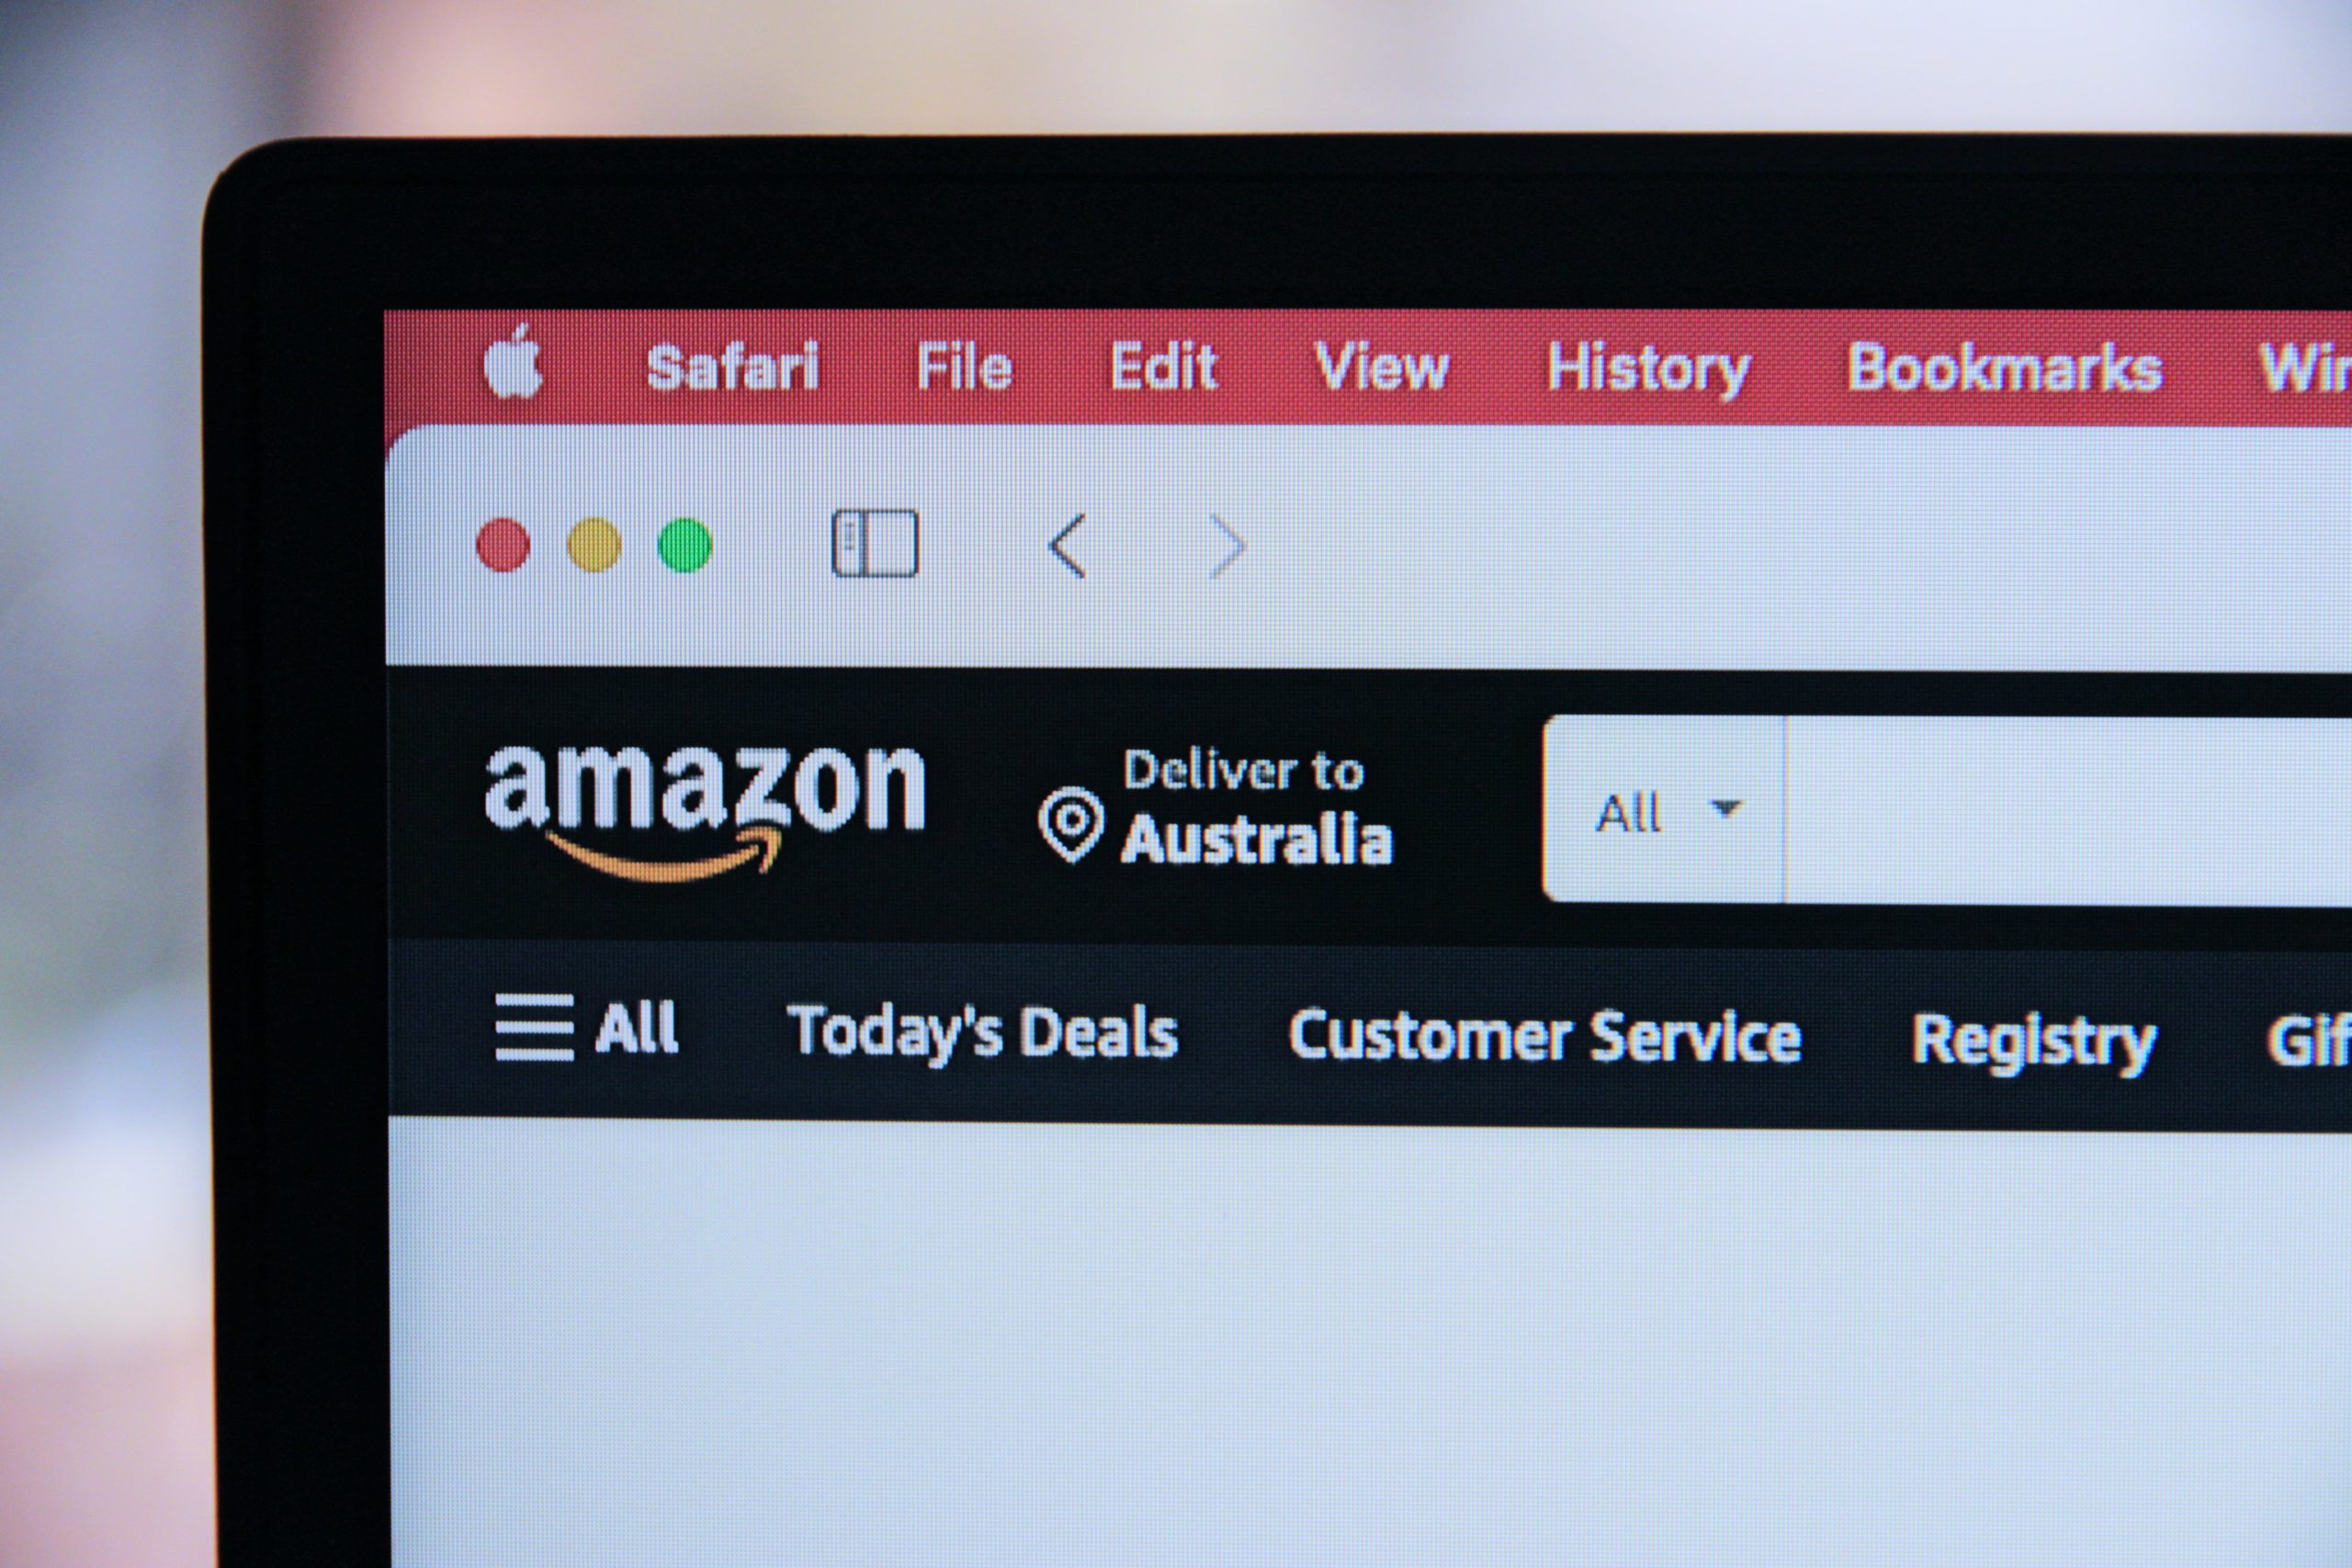 Digital Marketing Blog: The image shows the top of a laptop screen with the Amazon website open. 